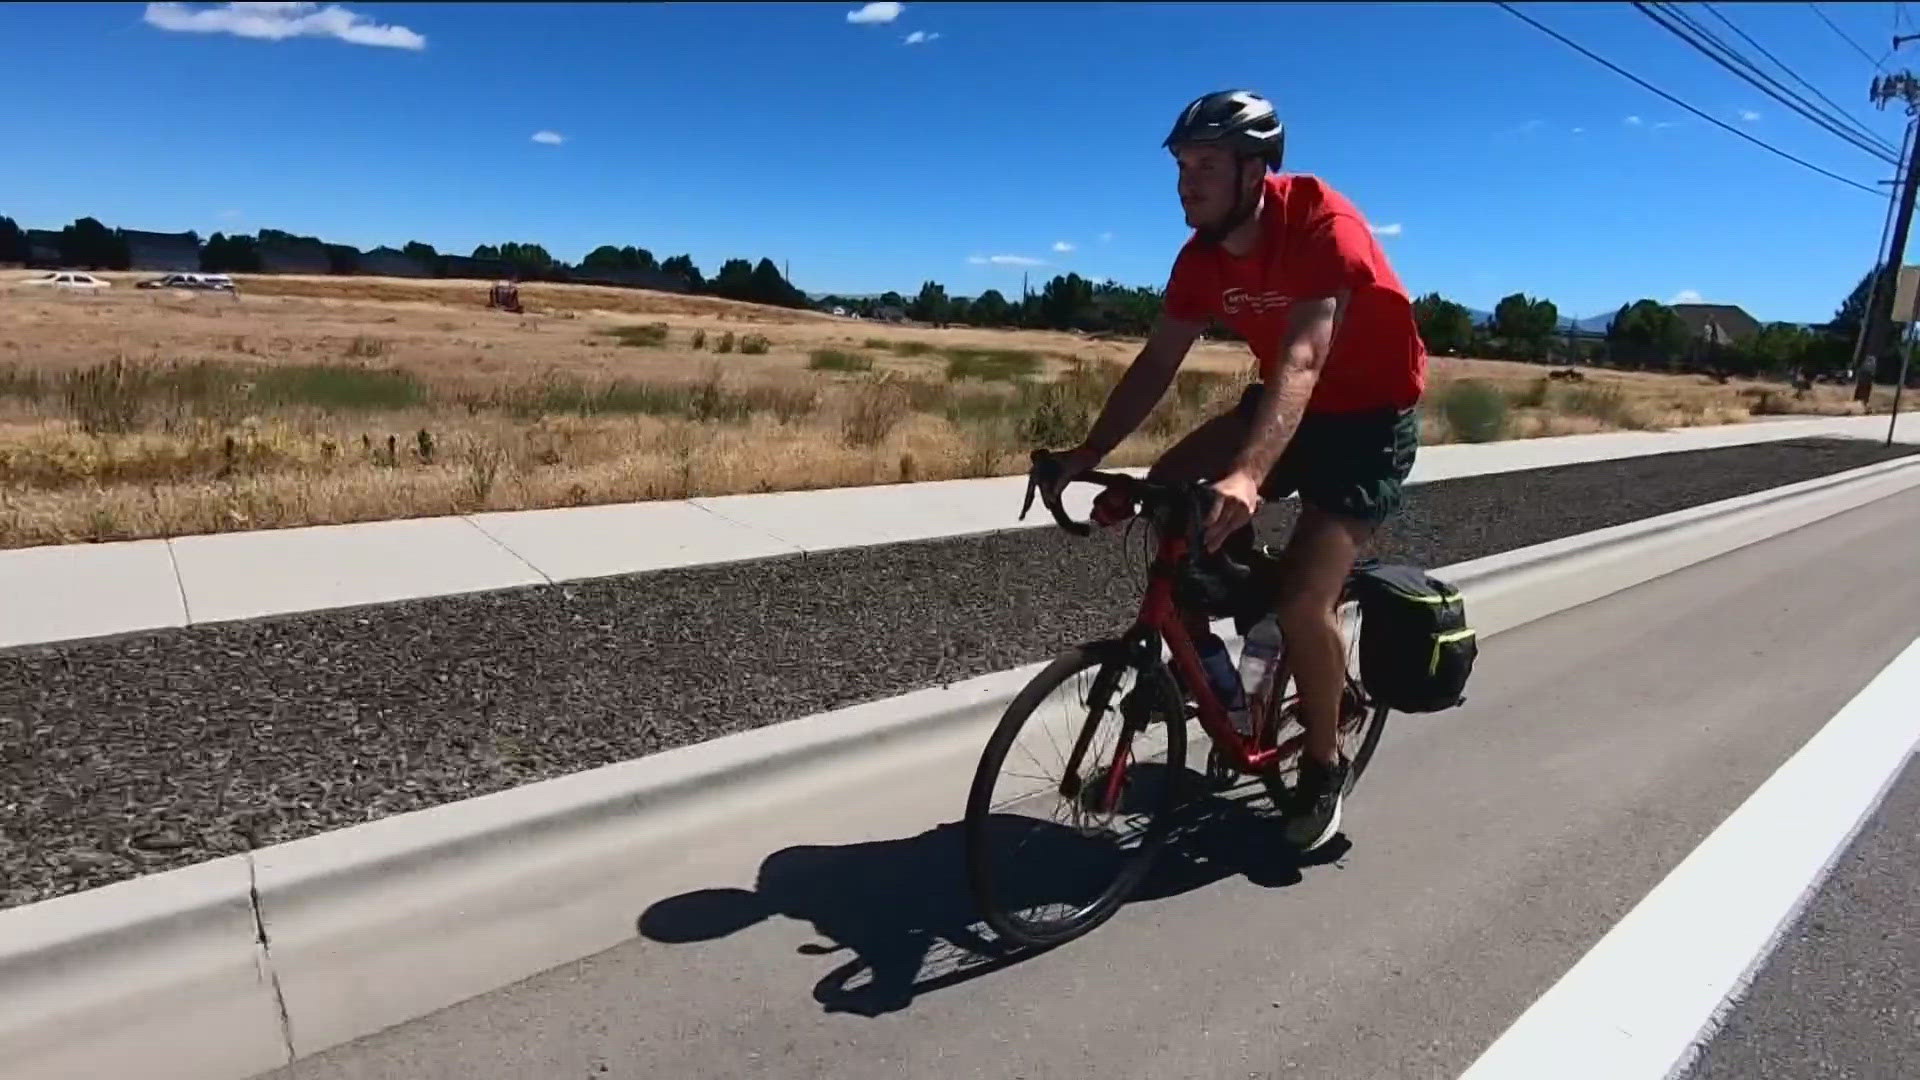 Spencer Cline is raising awareness for a hereditary form of dementia by riding his bike over 3,000 miles across the United States.